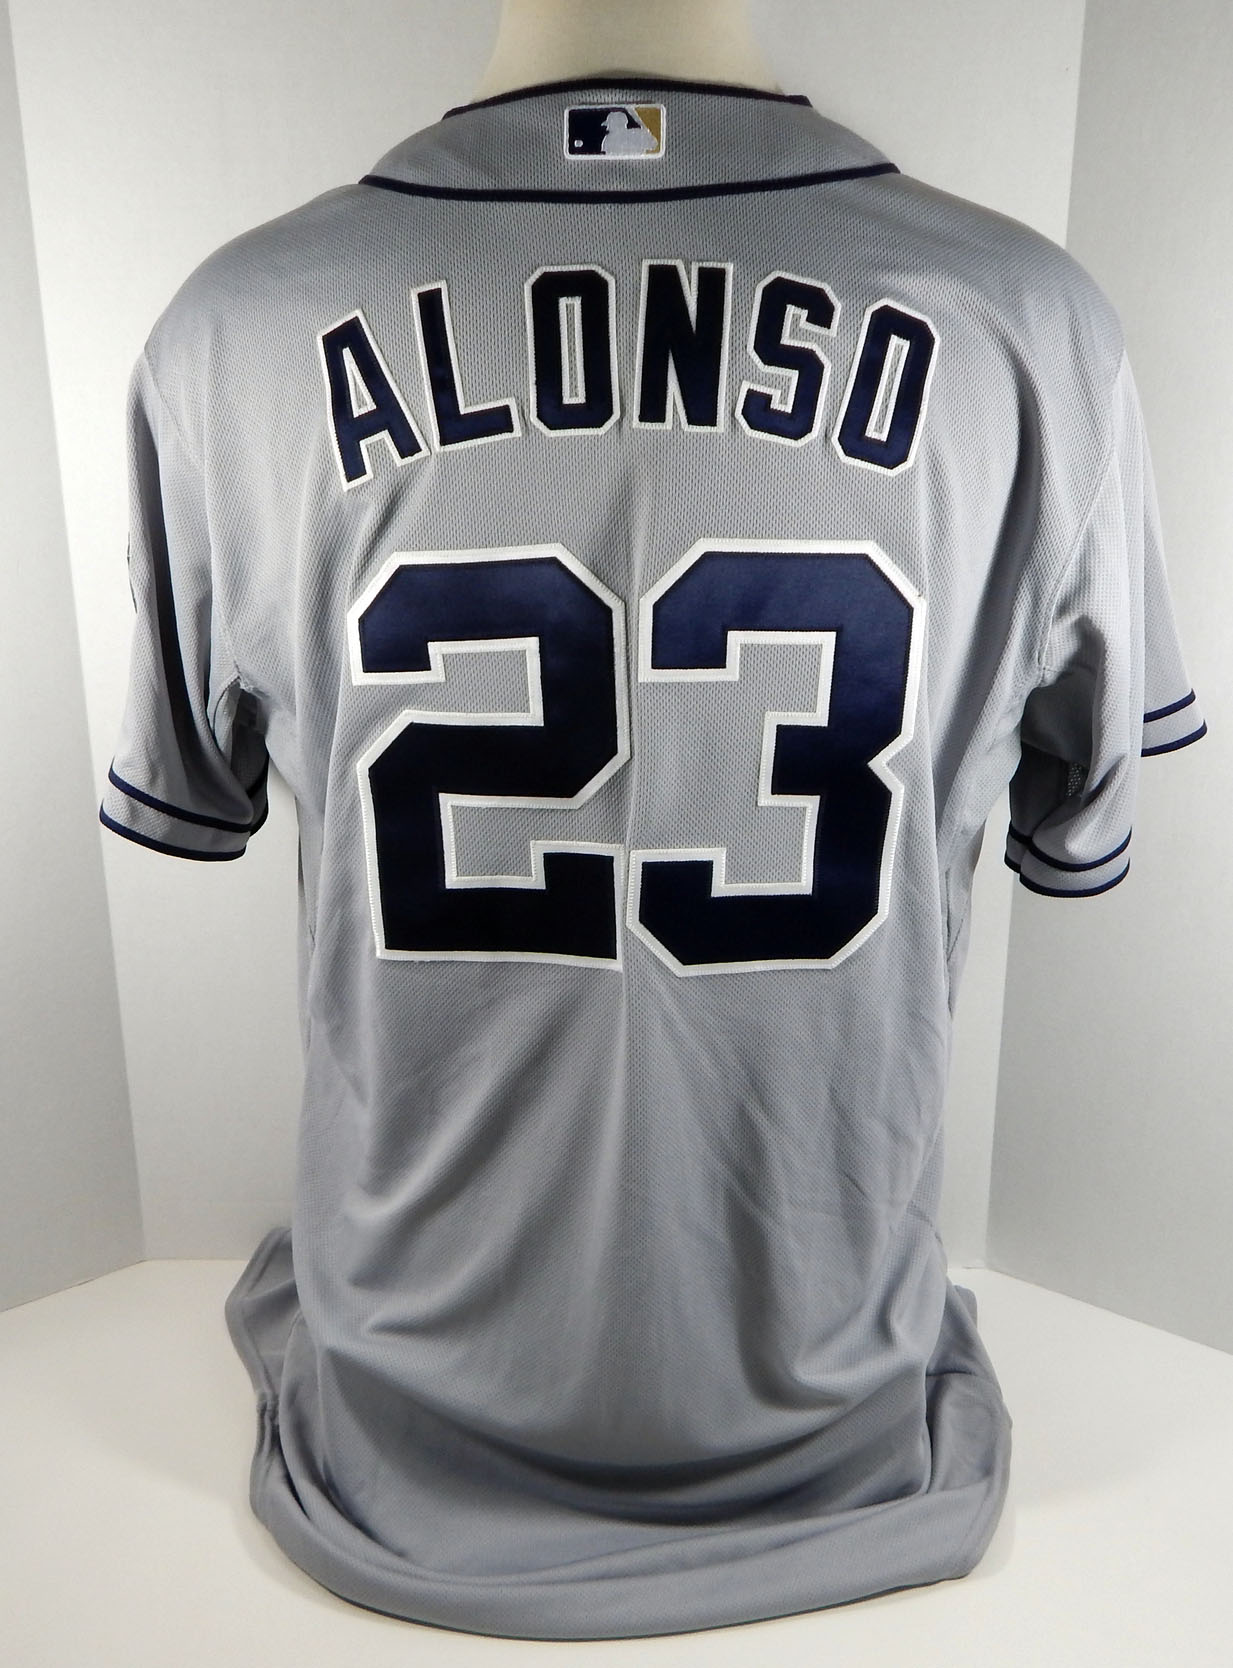 2015 San Diego Padres Yonder Alonso #23 Game Issued Grey Jersey SDP0241